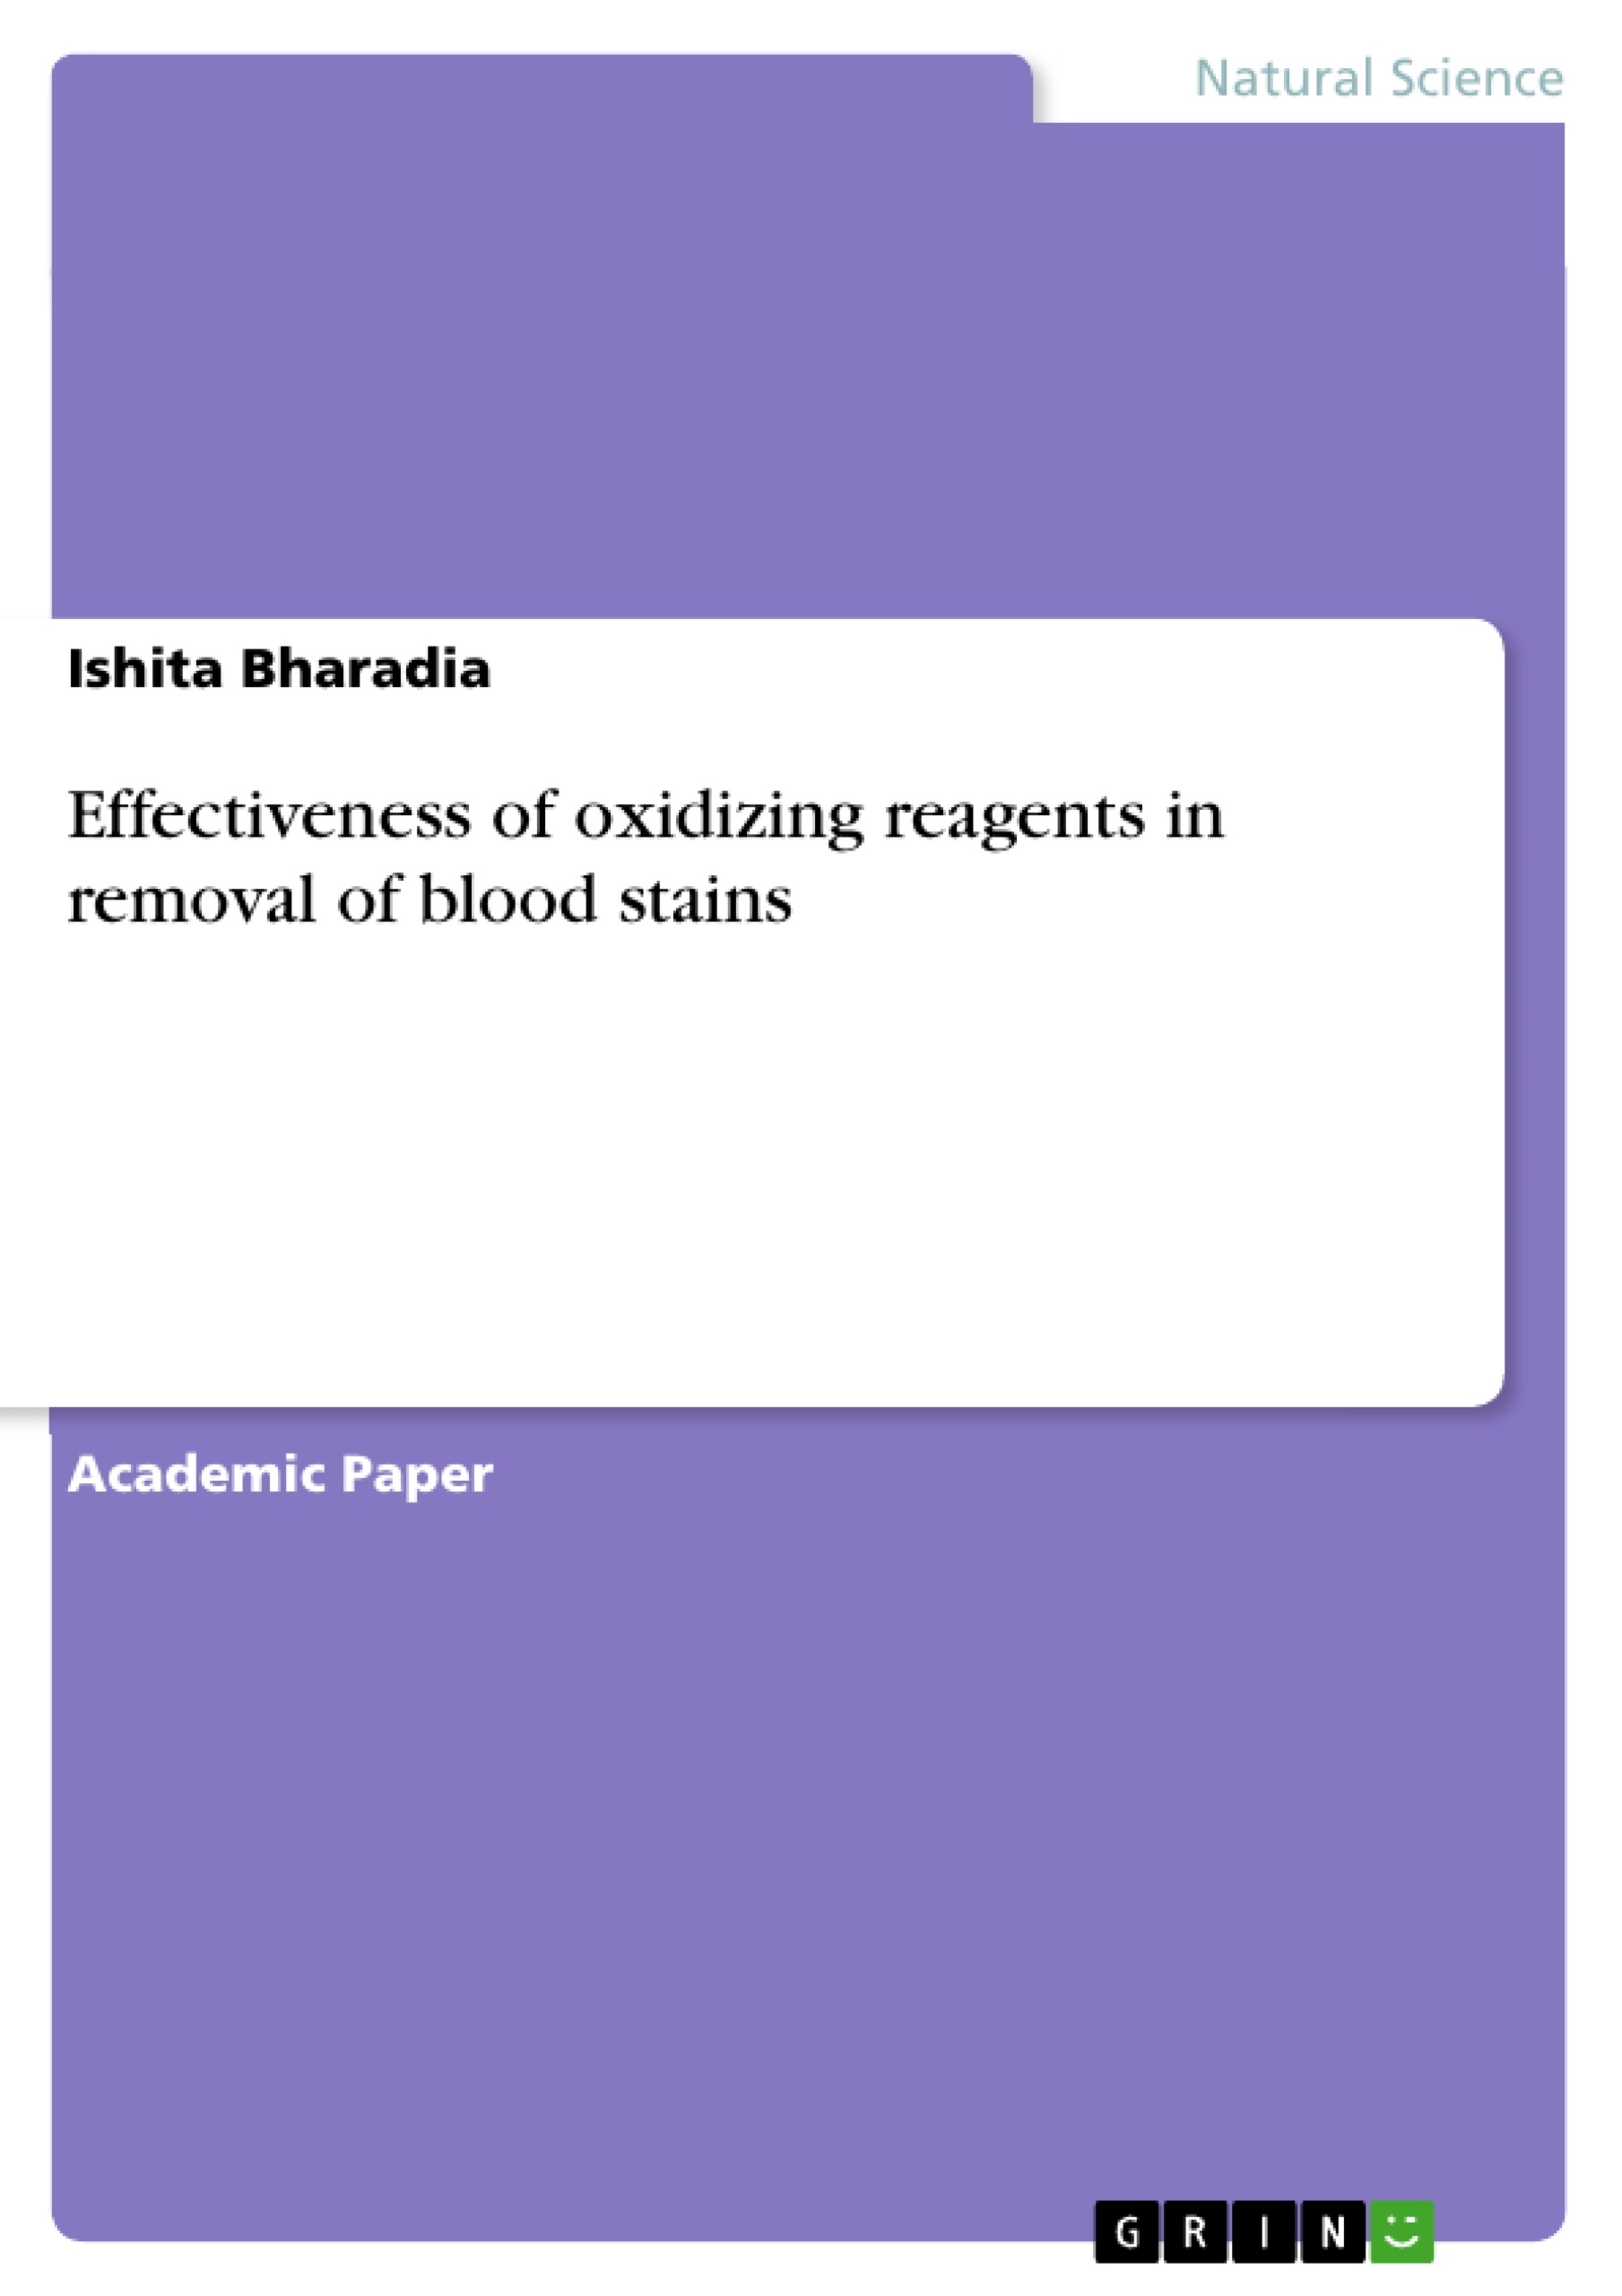 Título: Effectiveness of oxidizing reagents in removal of blood stains